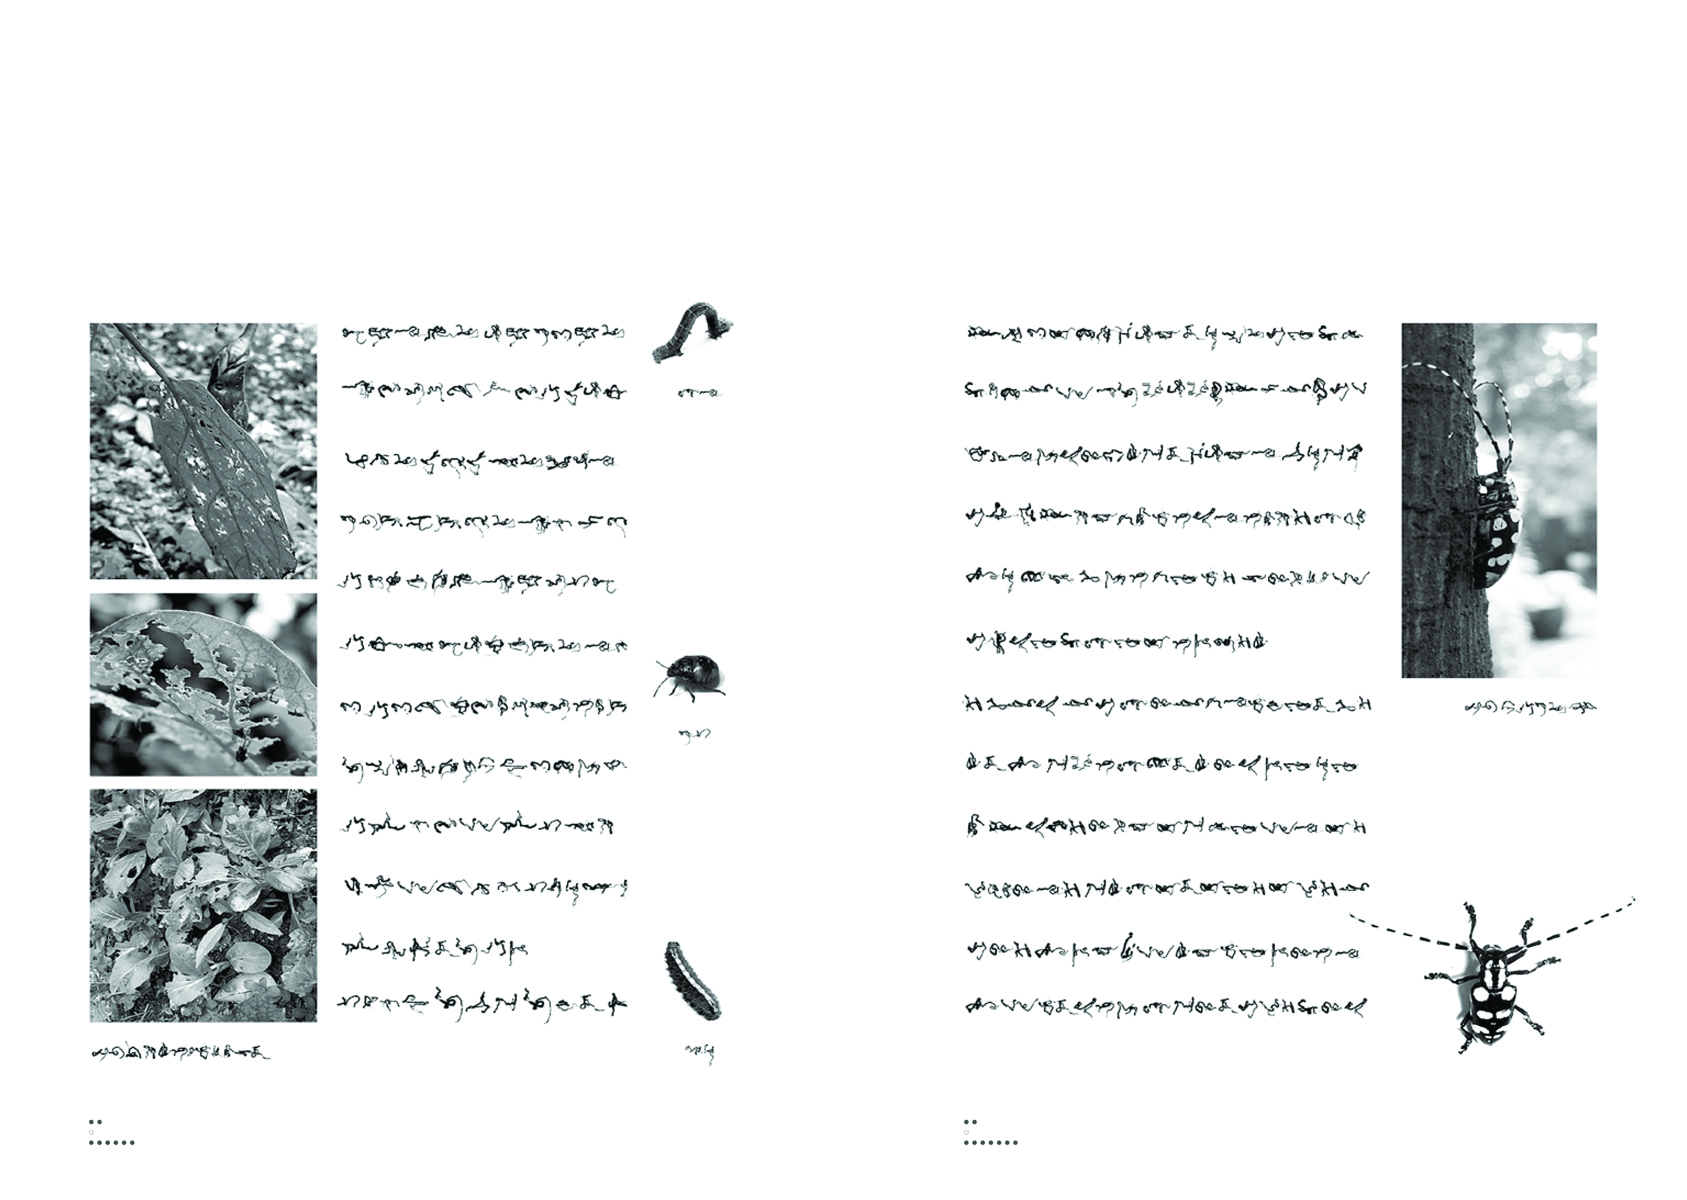 Half black half grey cover with The Language of Bugs in squiggly white font and a short piece of text about the book in black font.